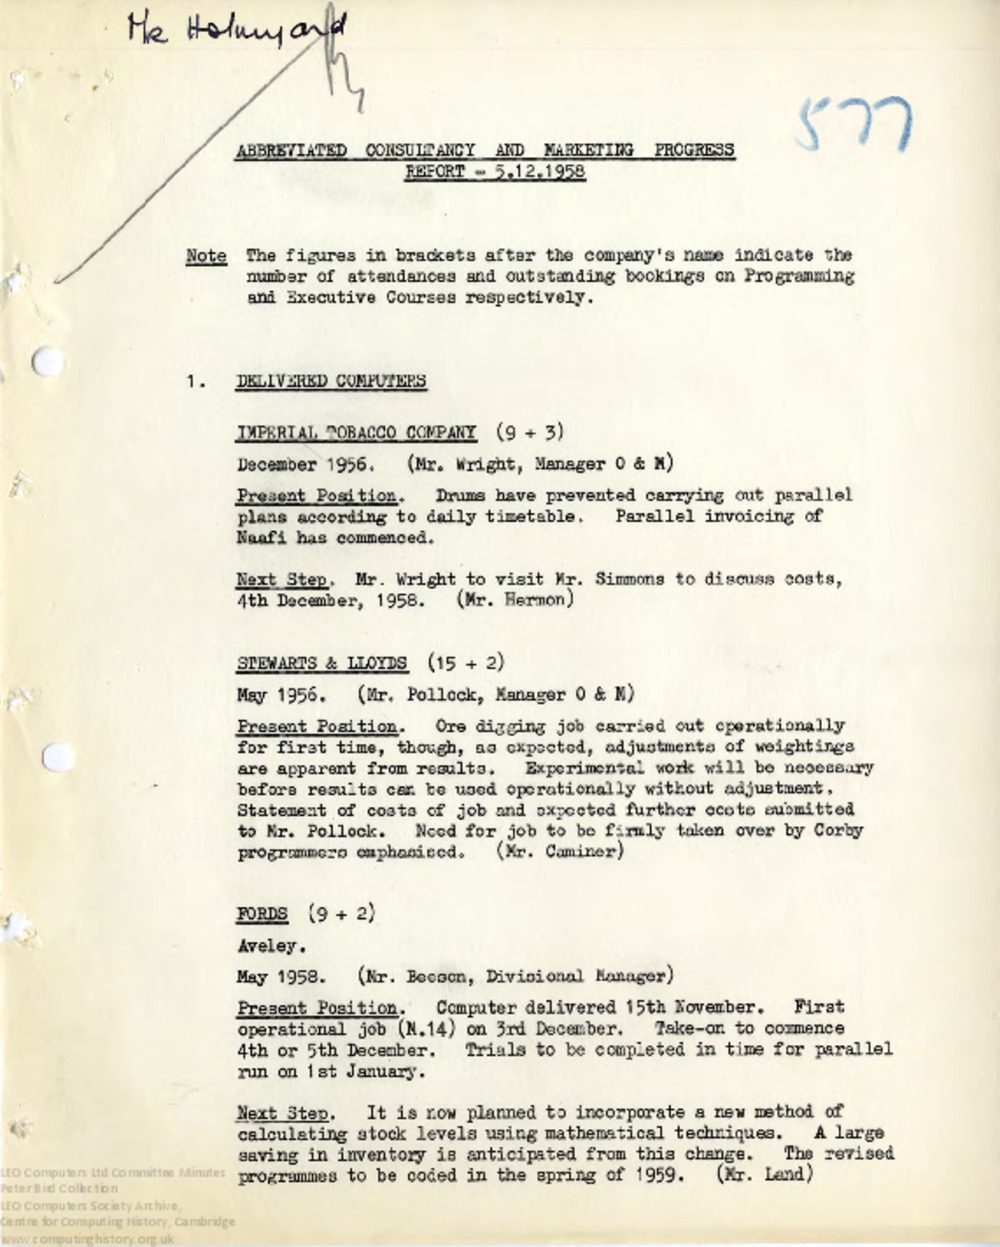 Article: 64466 Abbreviated Consultancy and Marketing Progress Report and Minutes, 5th Dec 1958